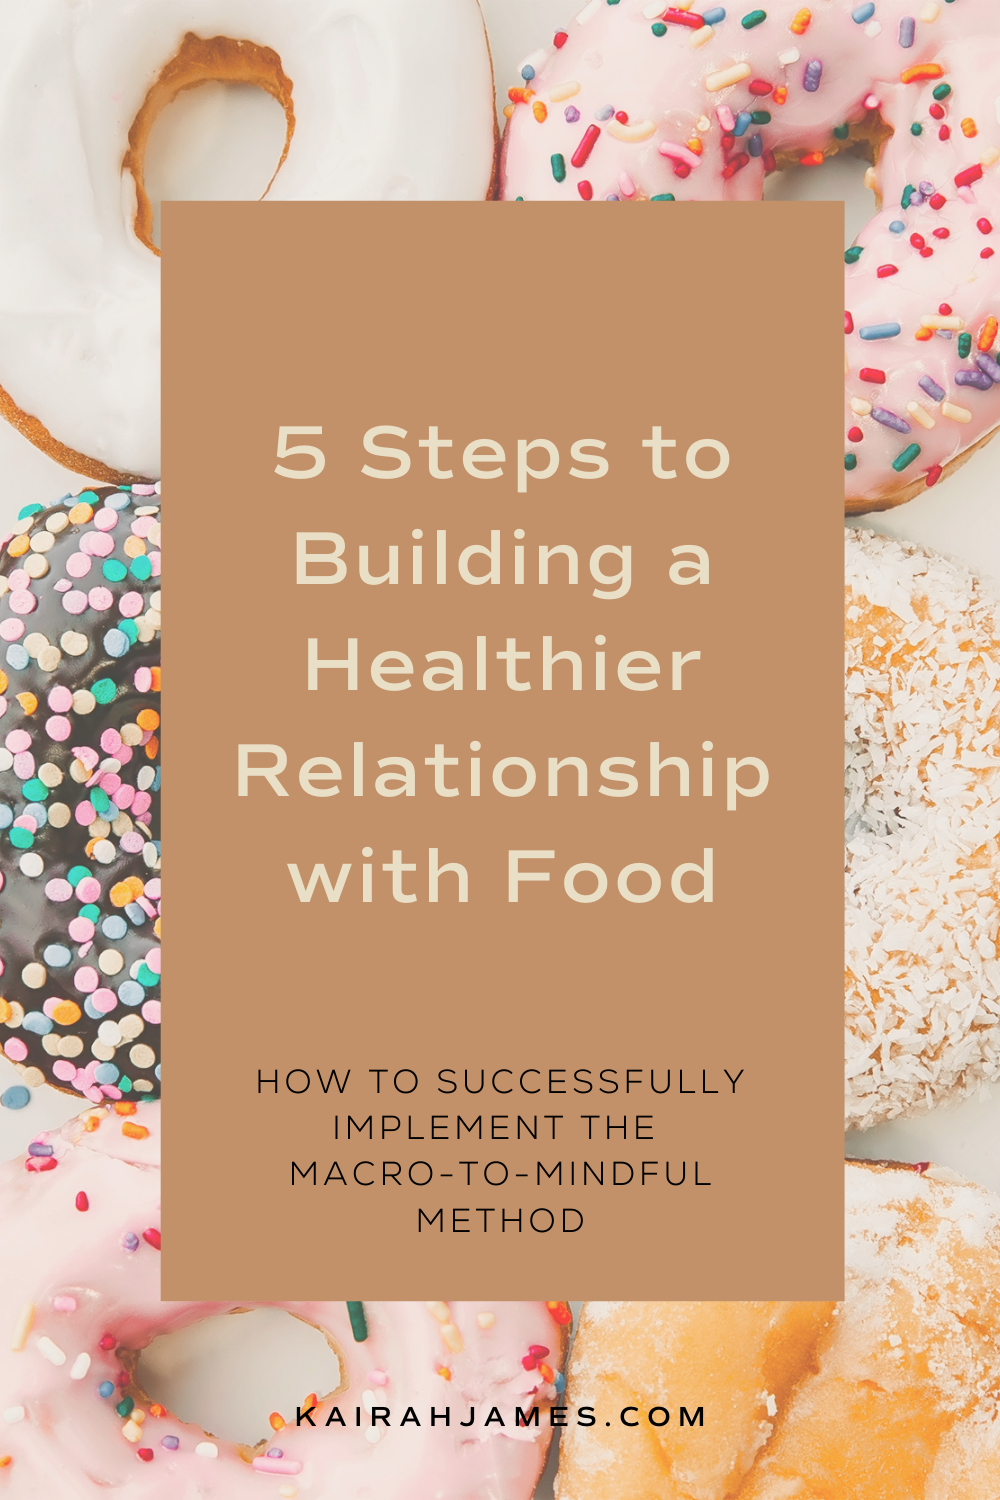 How to Build a Healthy Relationship with Food in 5 Simple Steps Using the Macro-to-MIndful Method